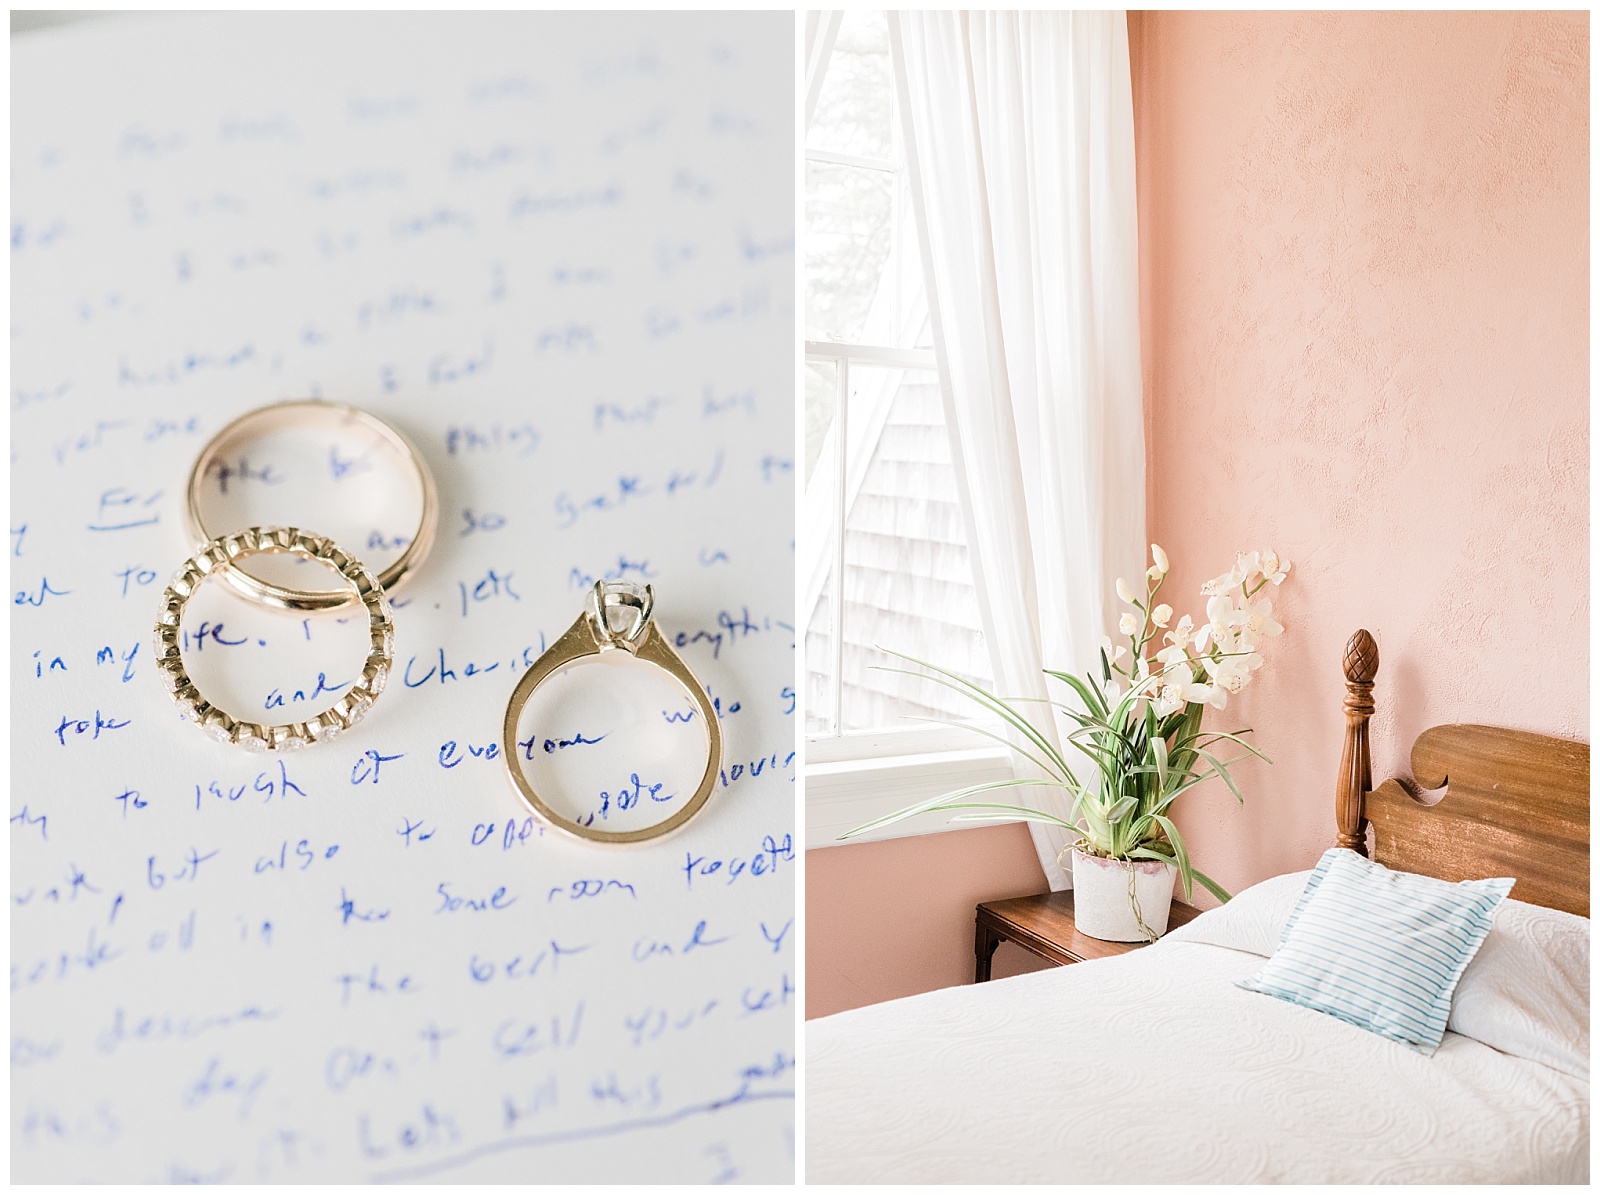 Wedding rings placed on a love letter written by the groom, paired with flowers on a bedside table in a pink bridal suite.